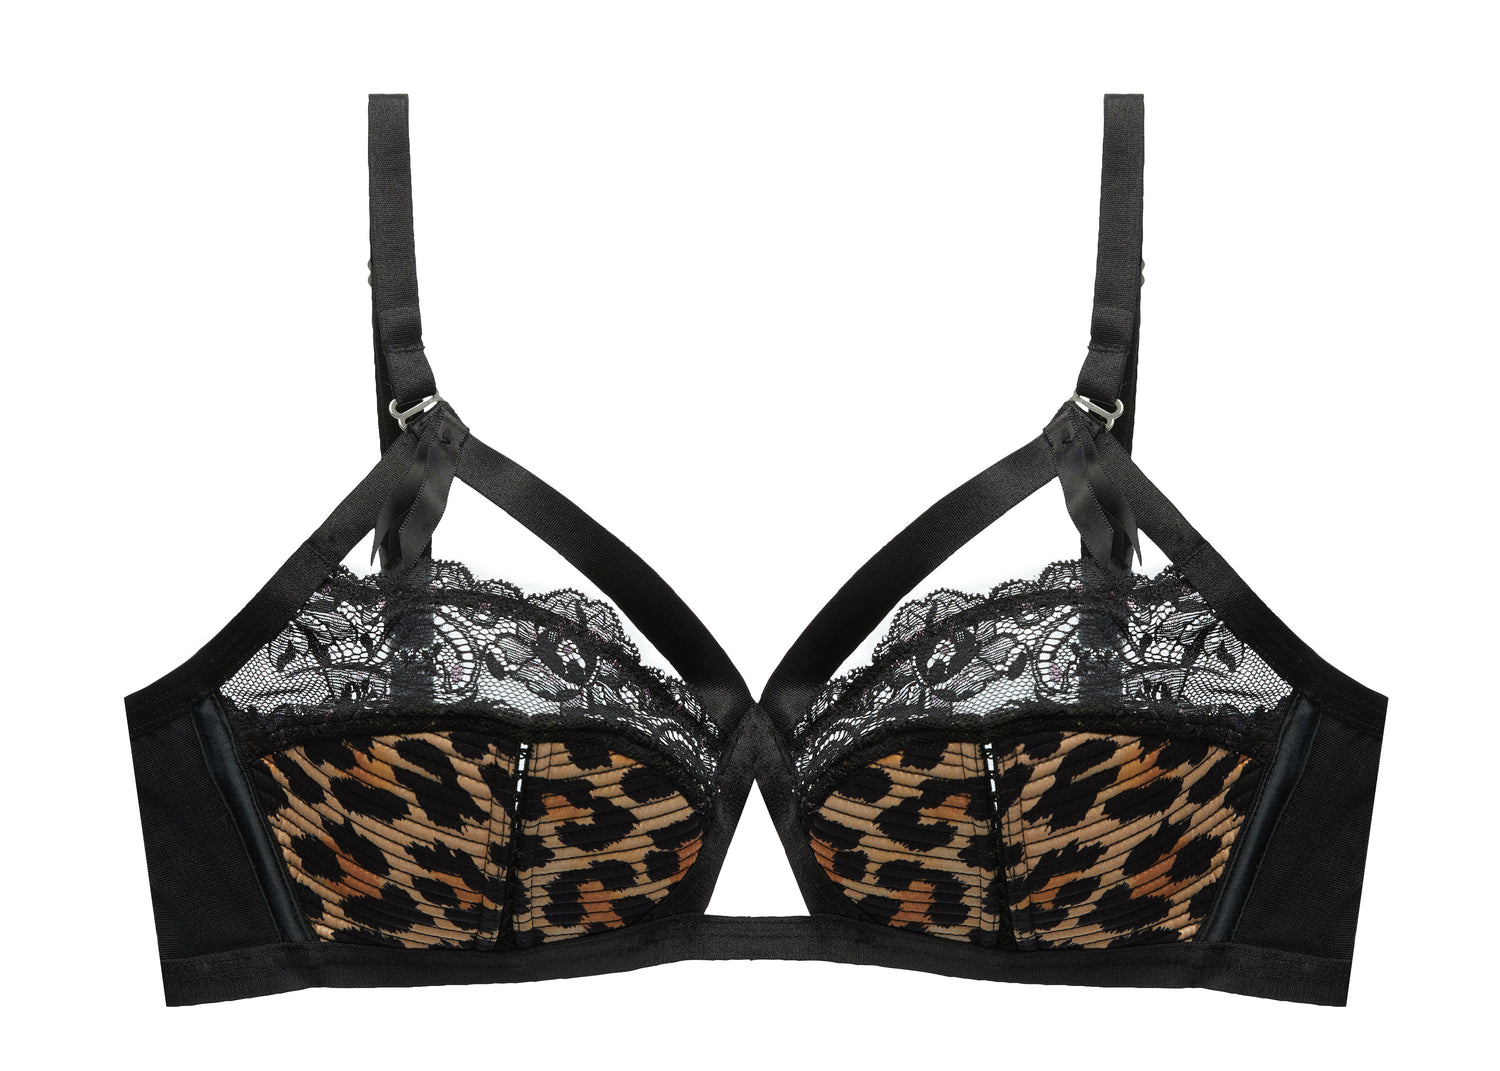 Dita von Teese Victresse Underwire Bra in Black/Chartreuse FINAL SALE (40%  Off) - Busted Bra Shop